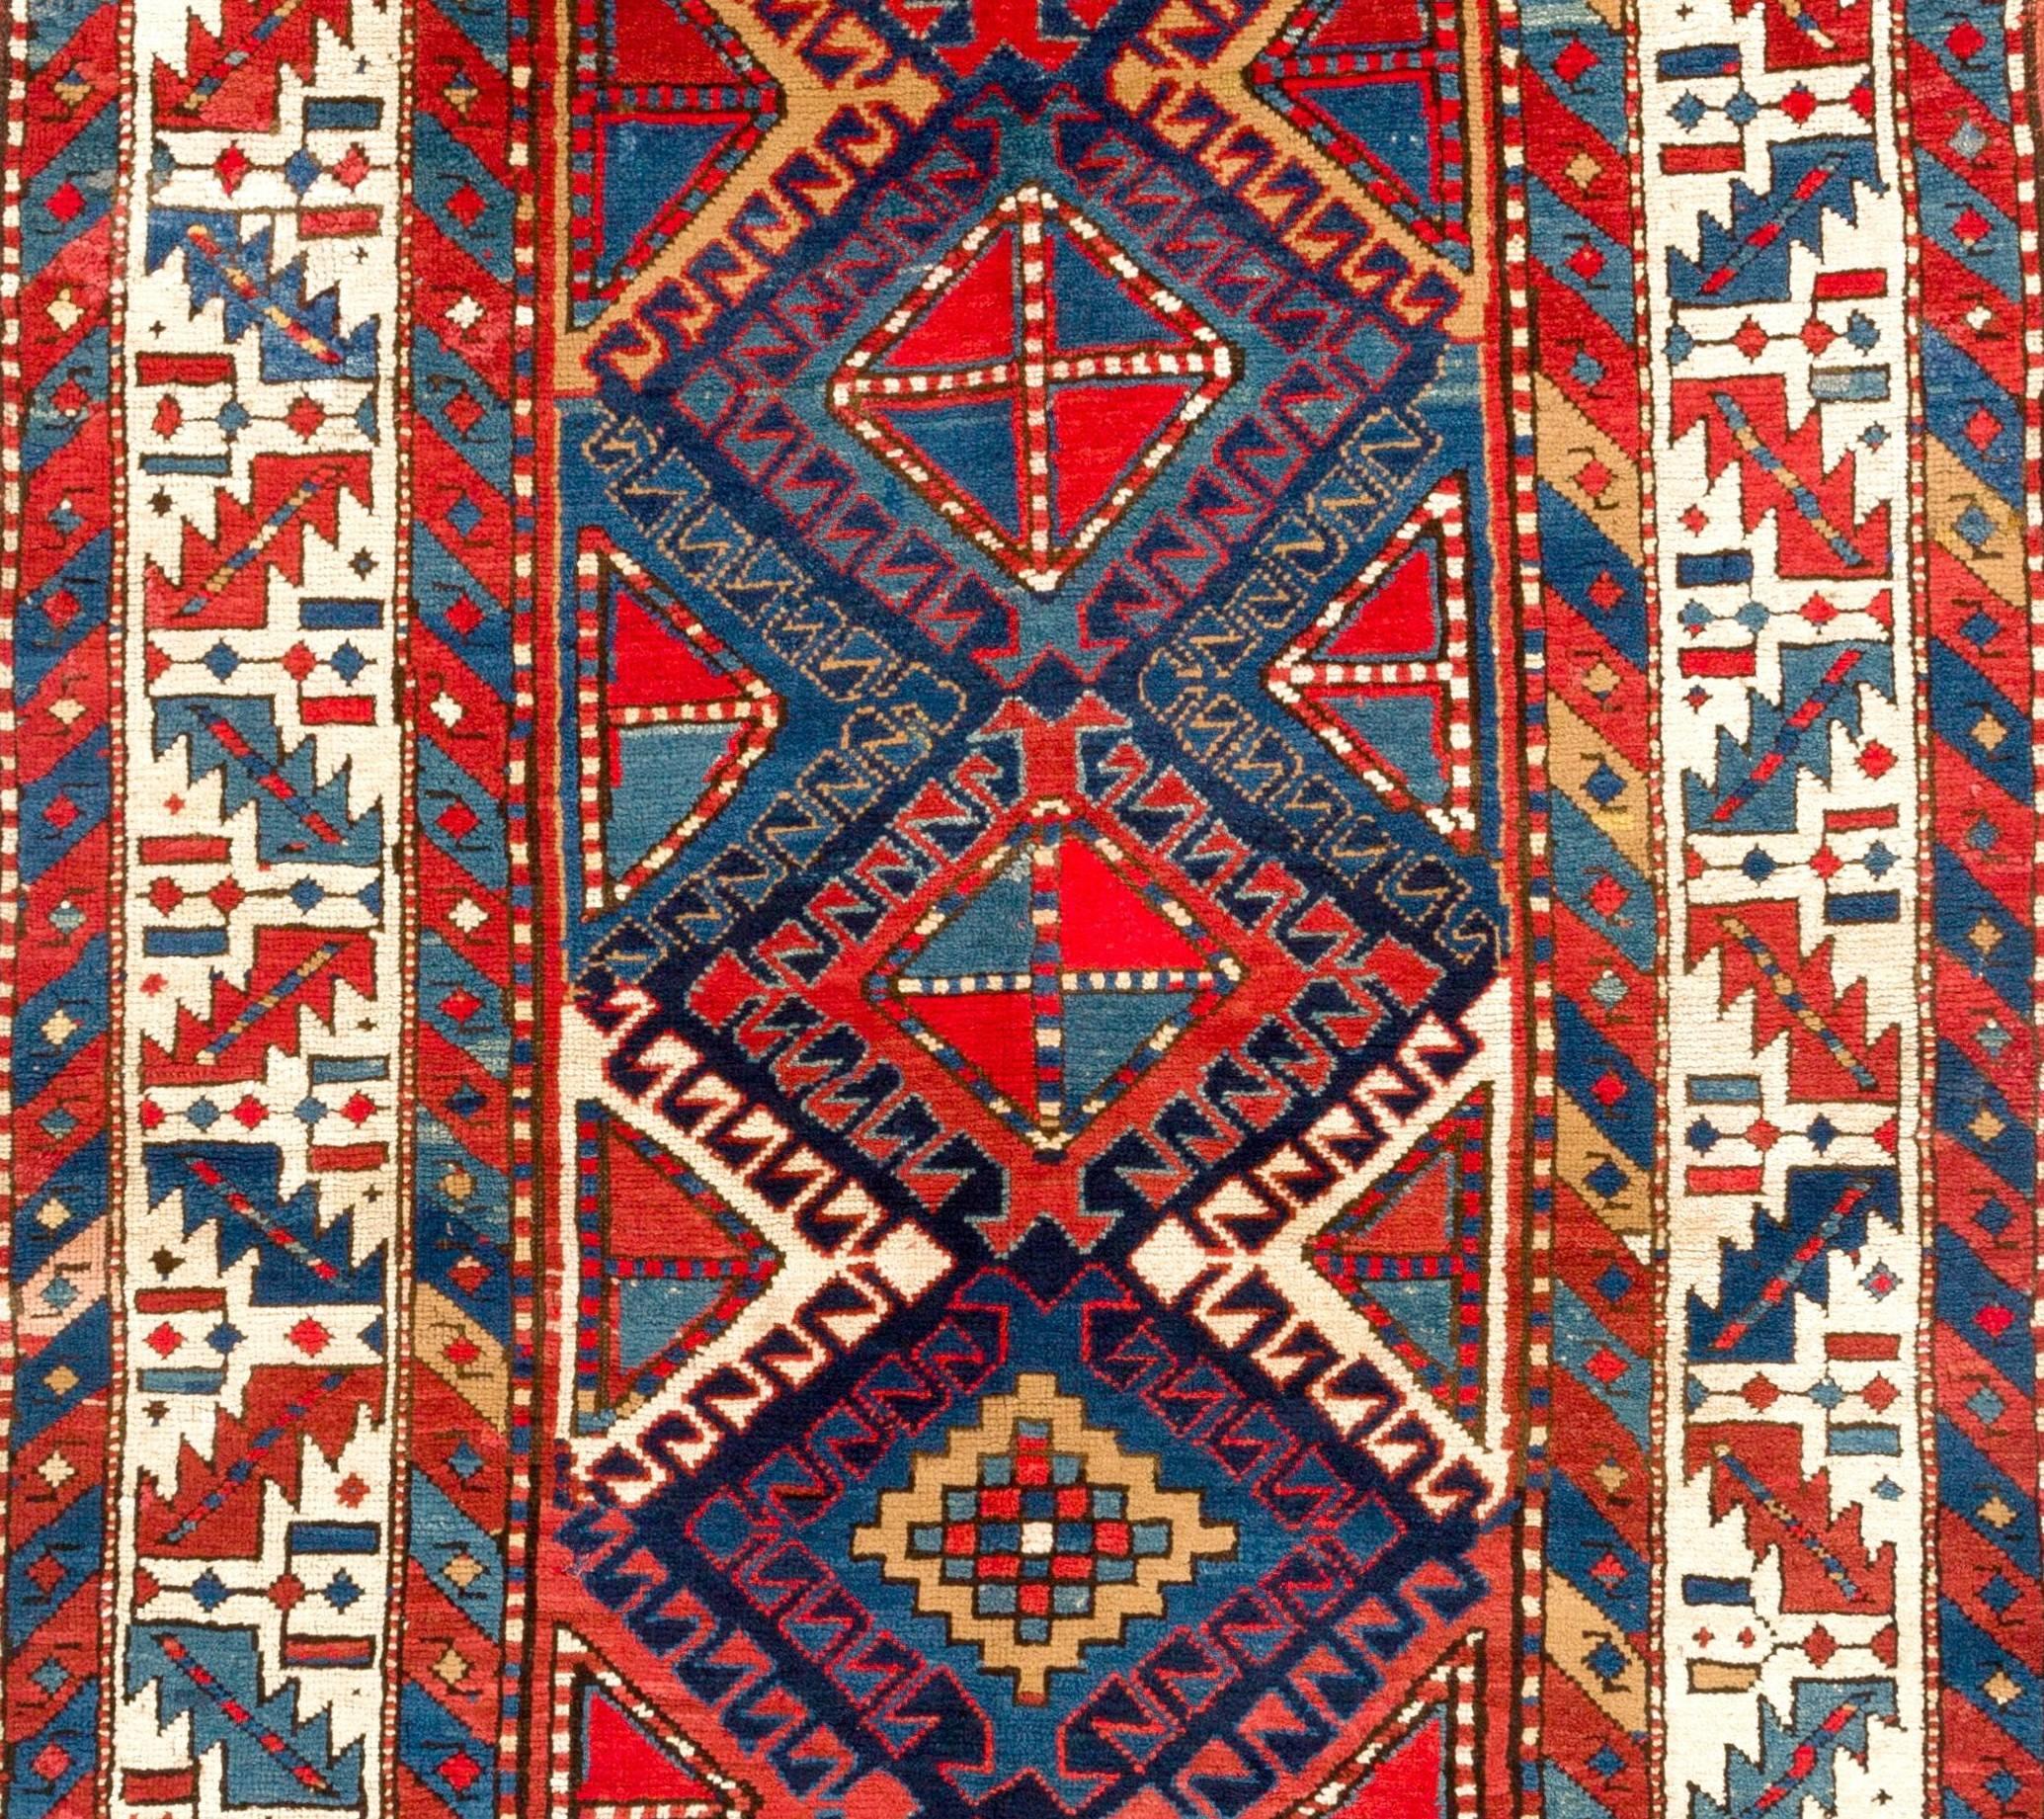 This truly vibrant, antique Gendje Kazak long rug from central Azerbaijan in the south Caucasus features a strongly geometric field format composed of an array of hooked diamonds with varying centers, all surrounded by a Classic wine glass and